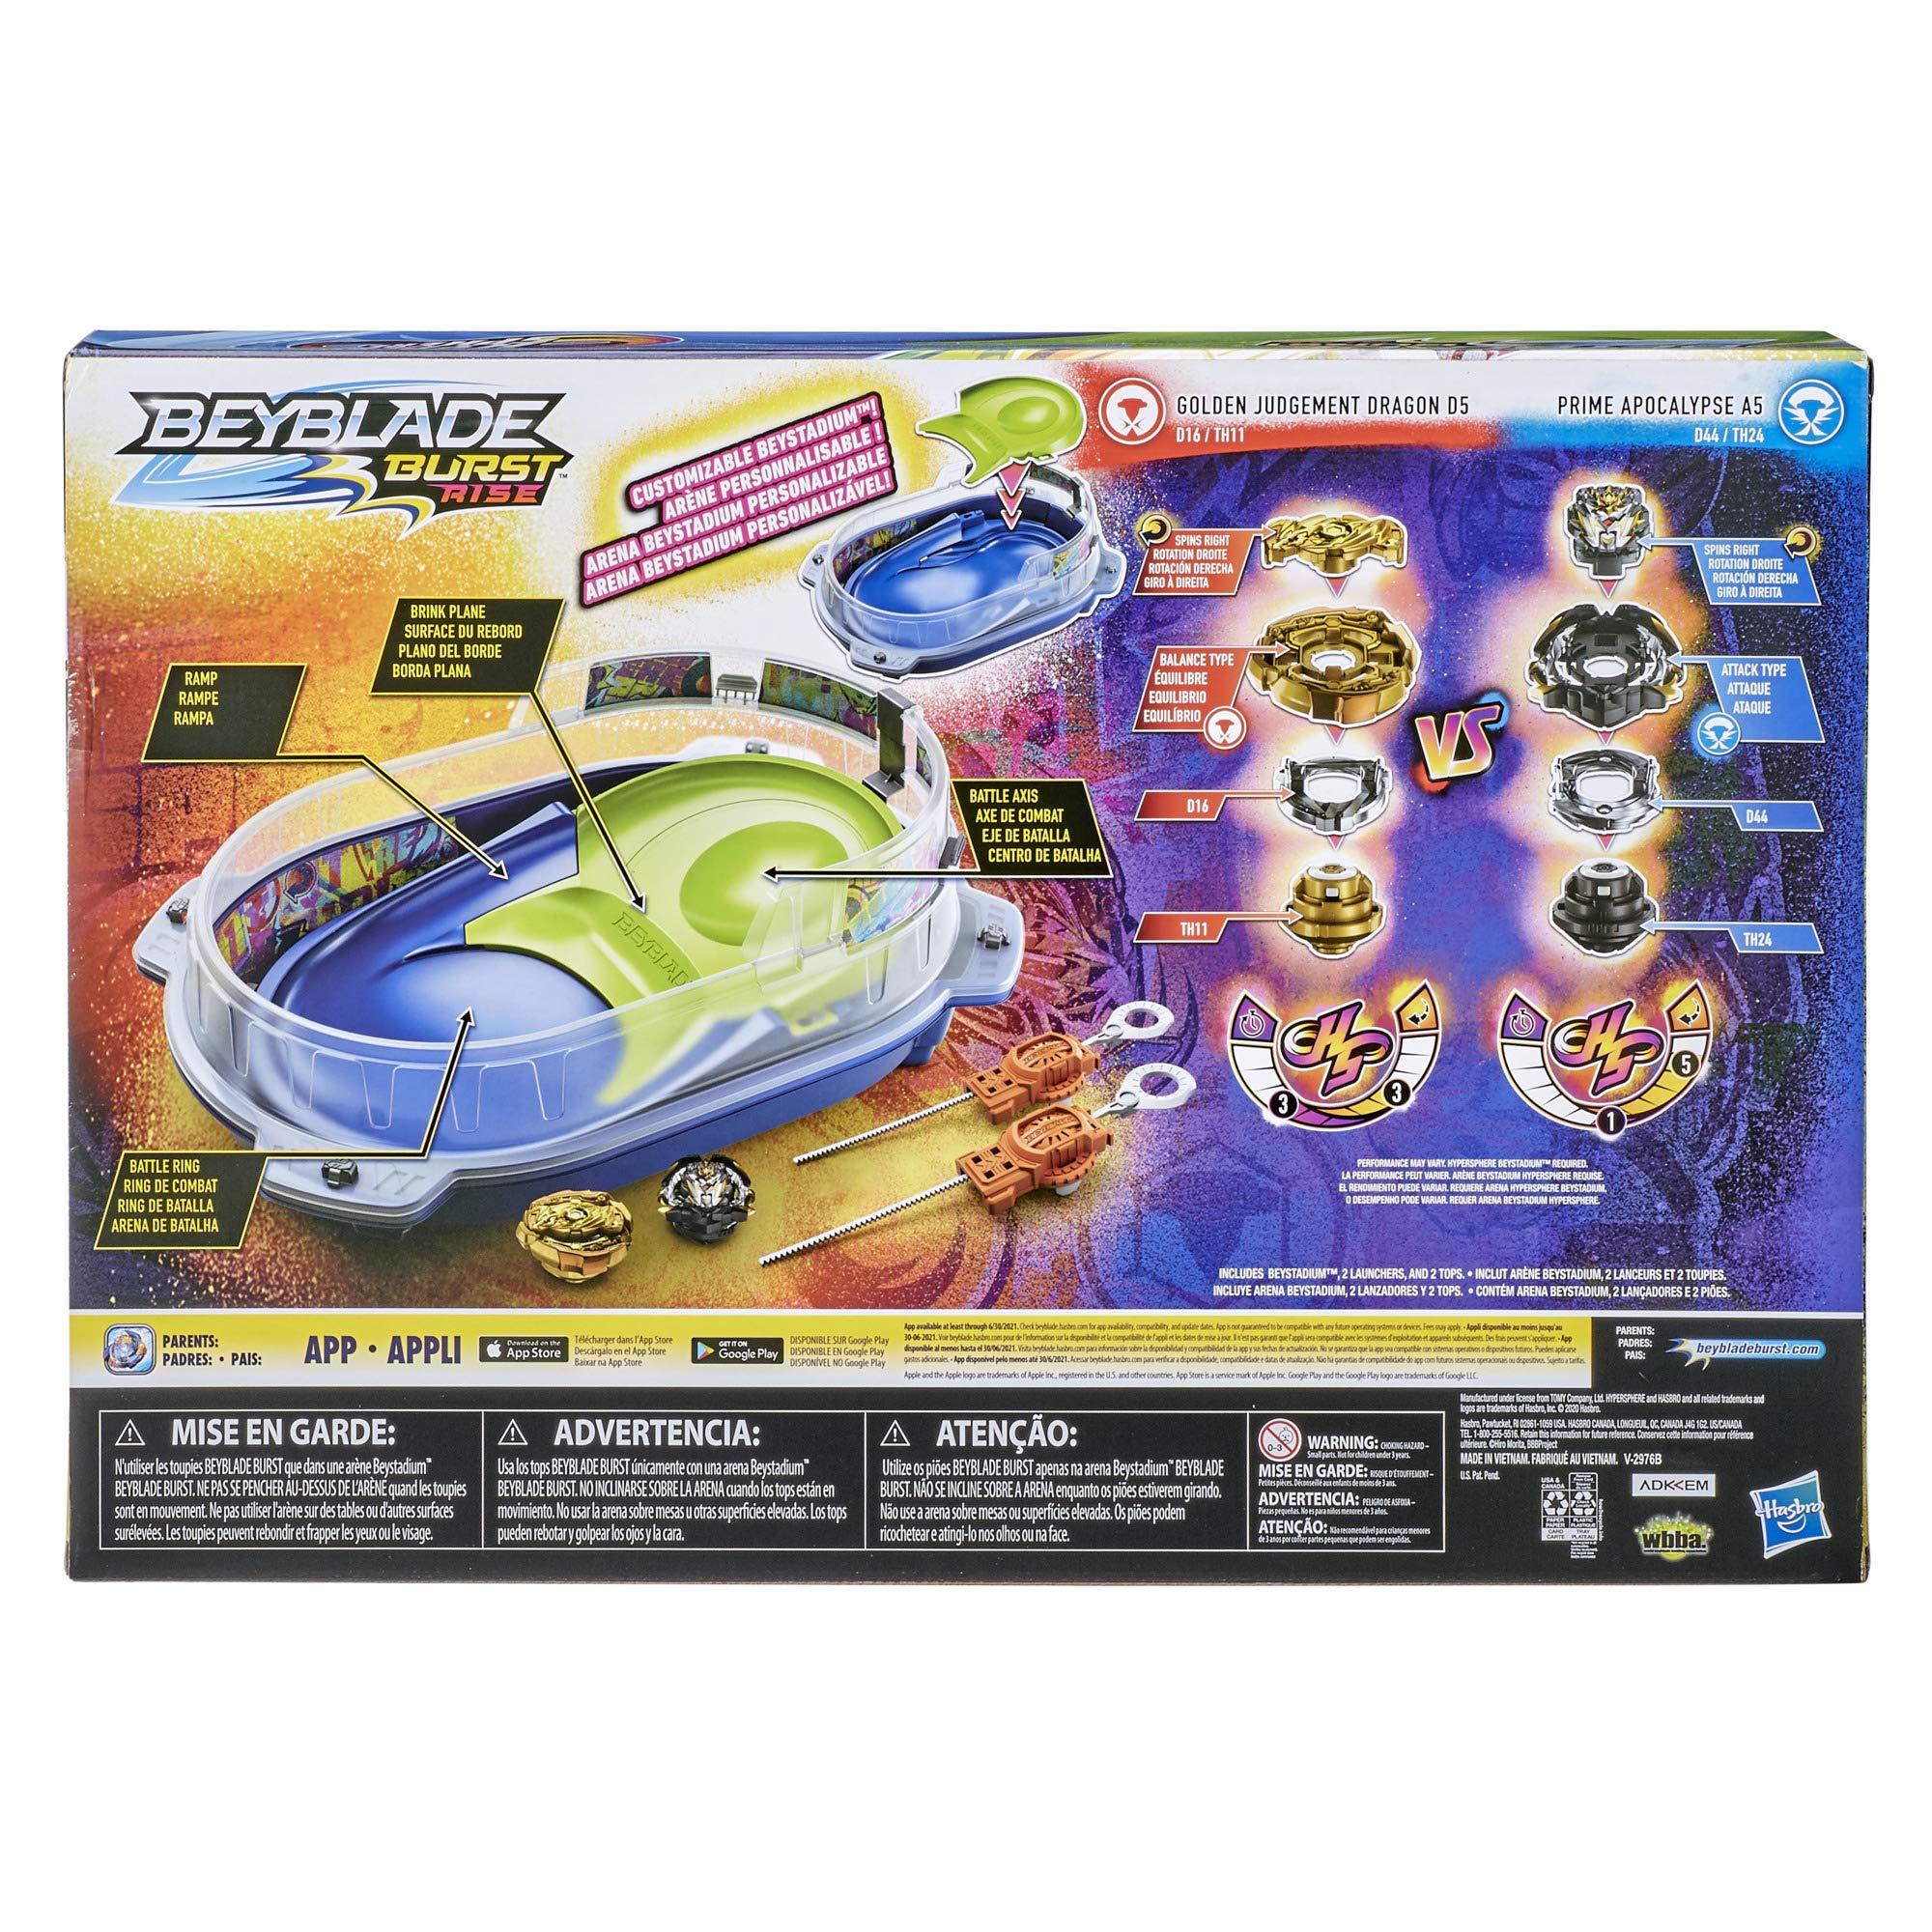 BEYBLADE Burst Rise Hypersphere Vortex Climb Battle Set - Complete Set with Beystadium, 2 Battling Top Toys and 2 Launchers, Ages 8 and Up